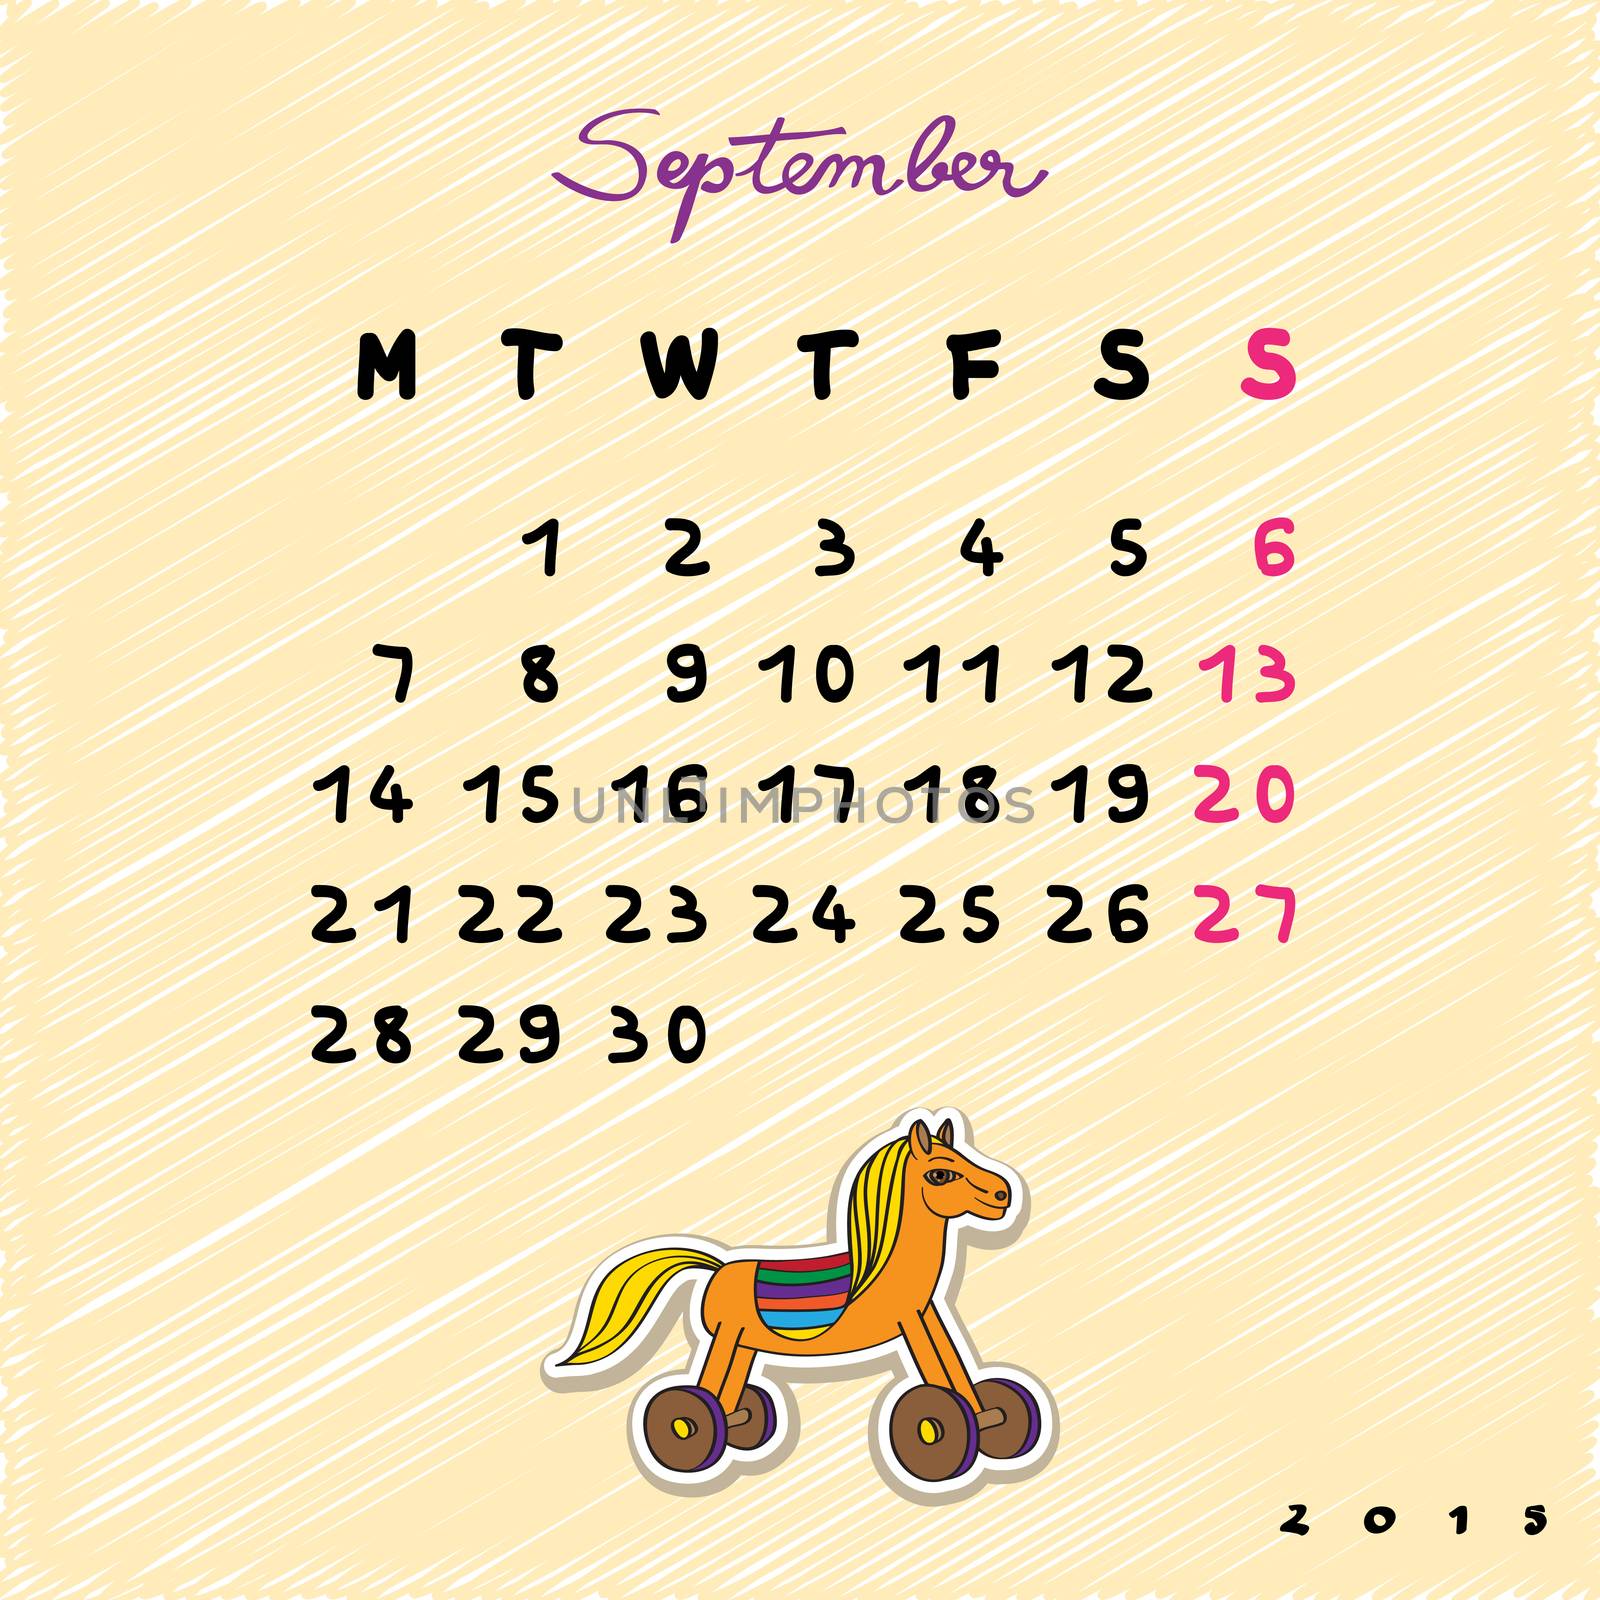 2015 horses september by catacos